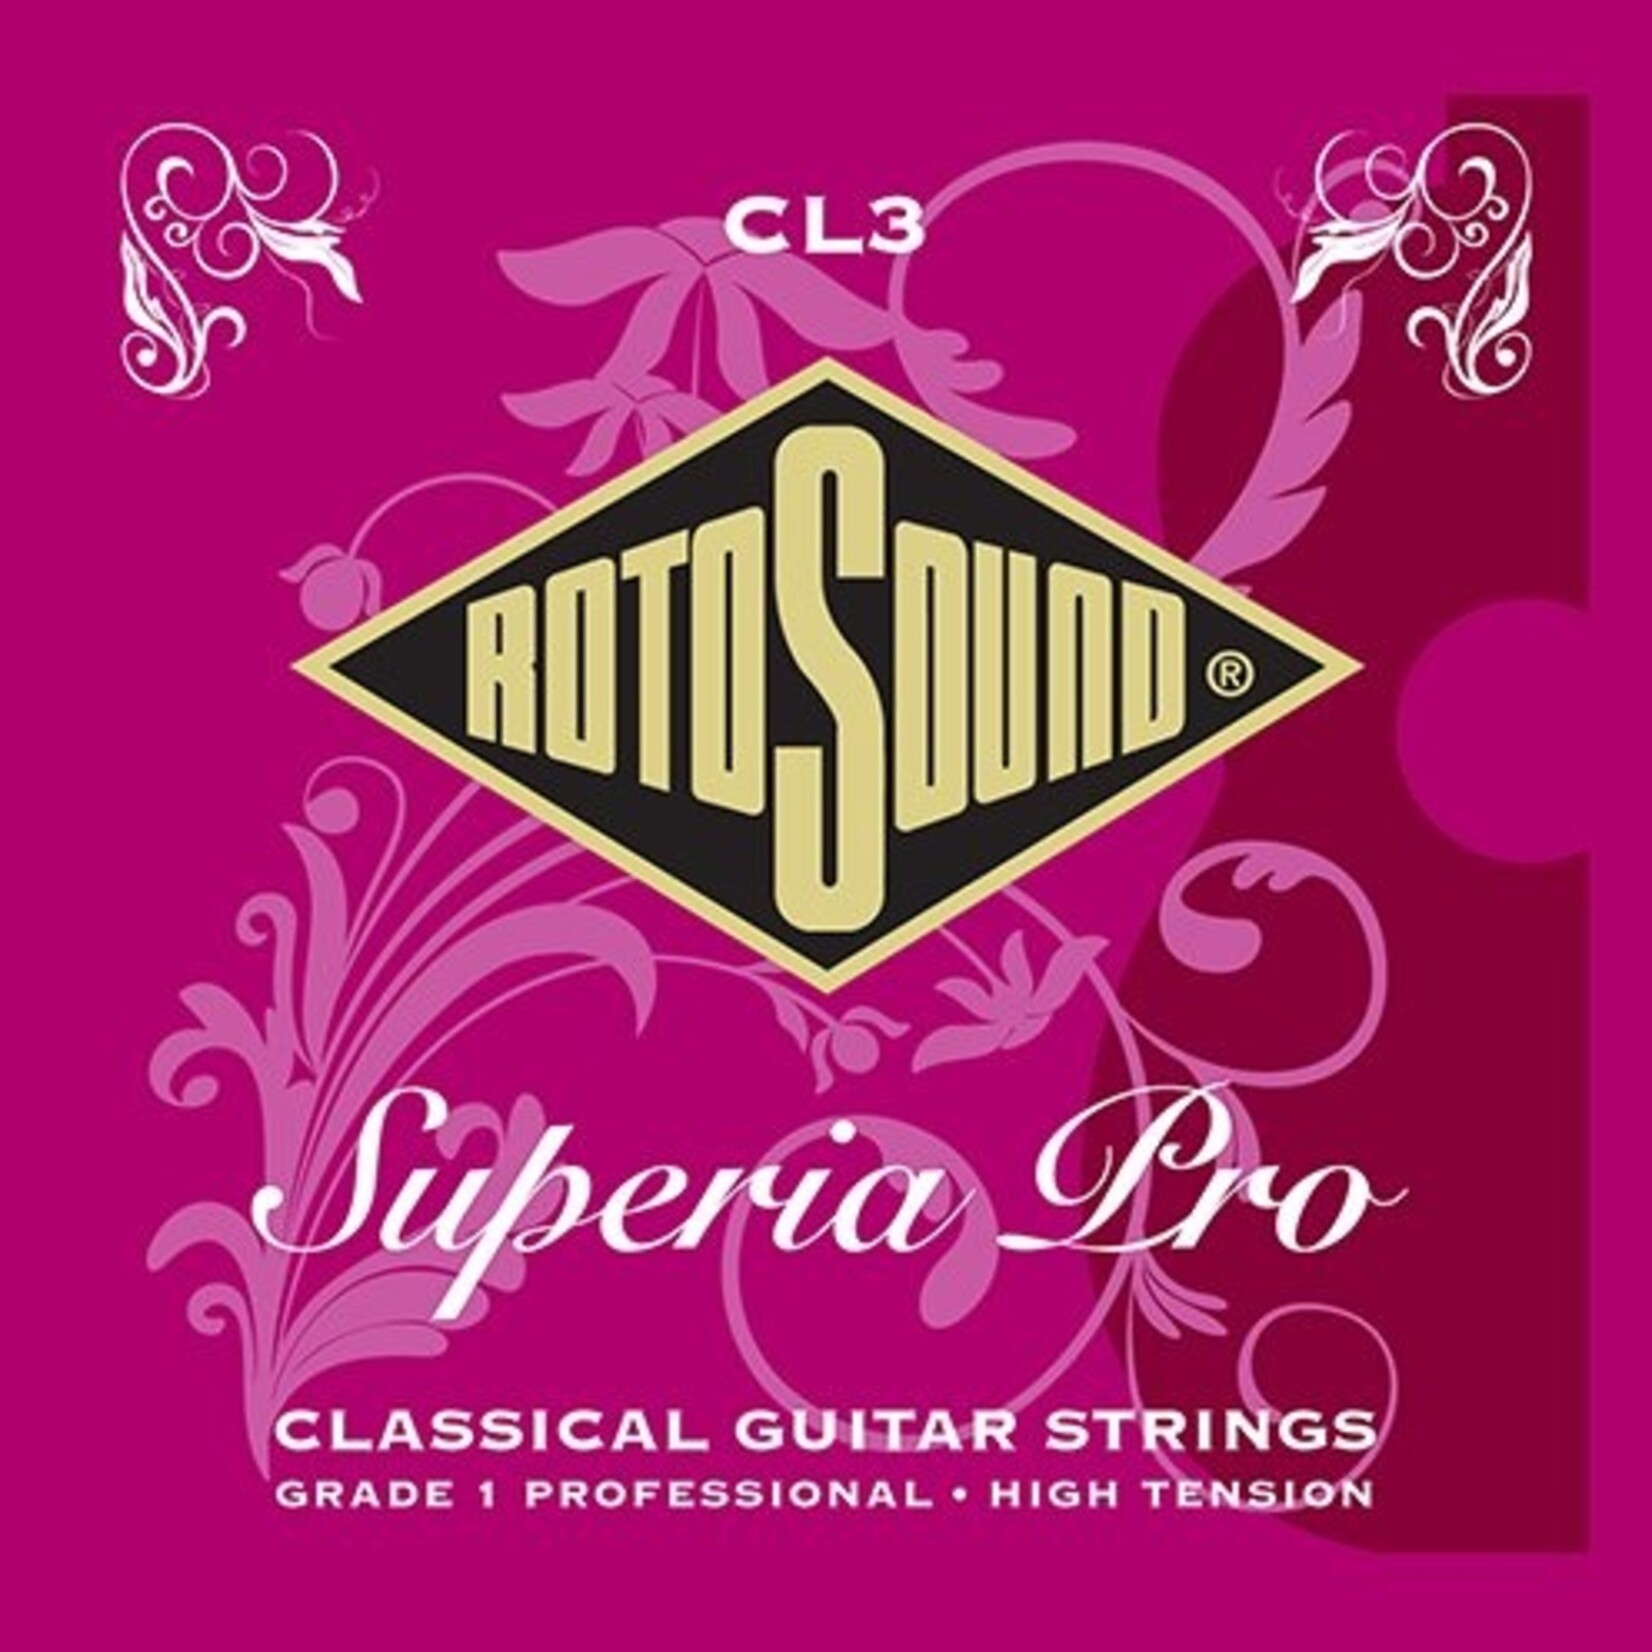 Rotosound CL3 Superia Pro High Tension Classical Guitar Strings